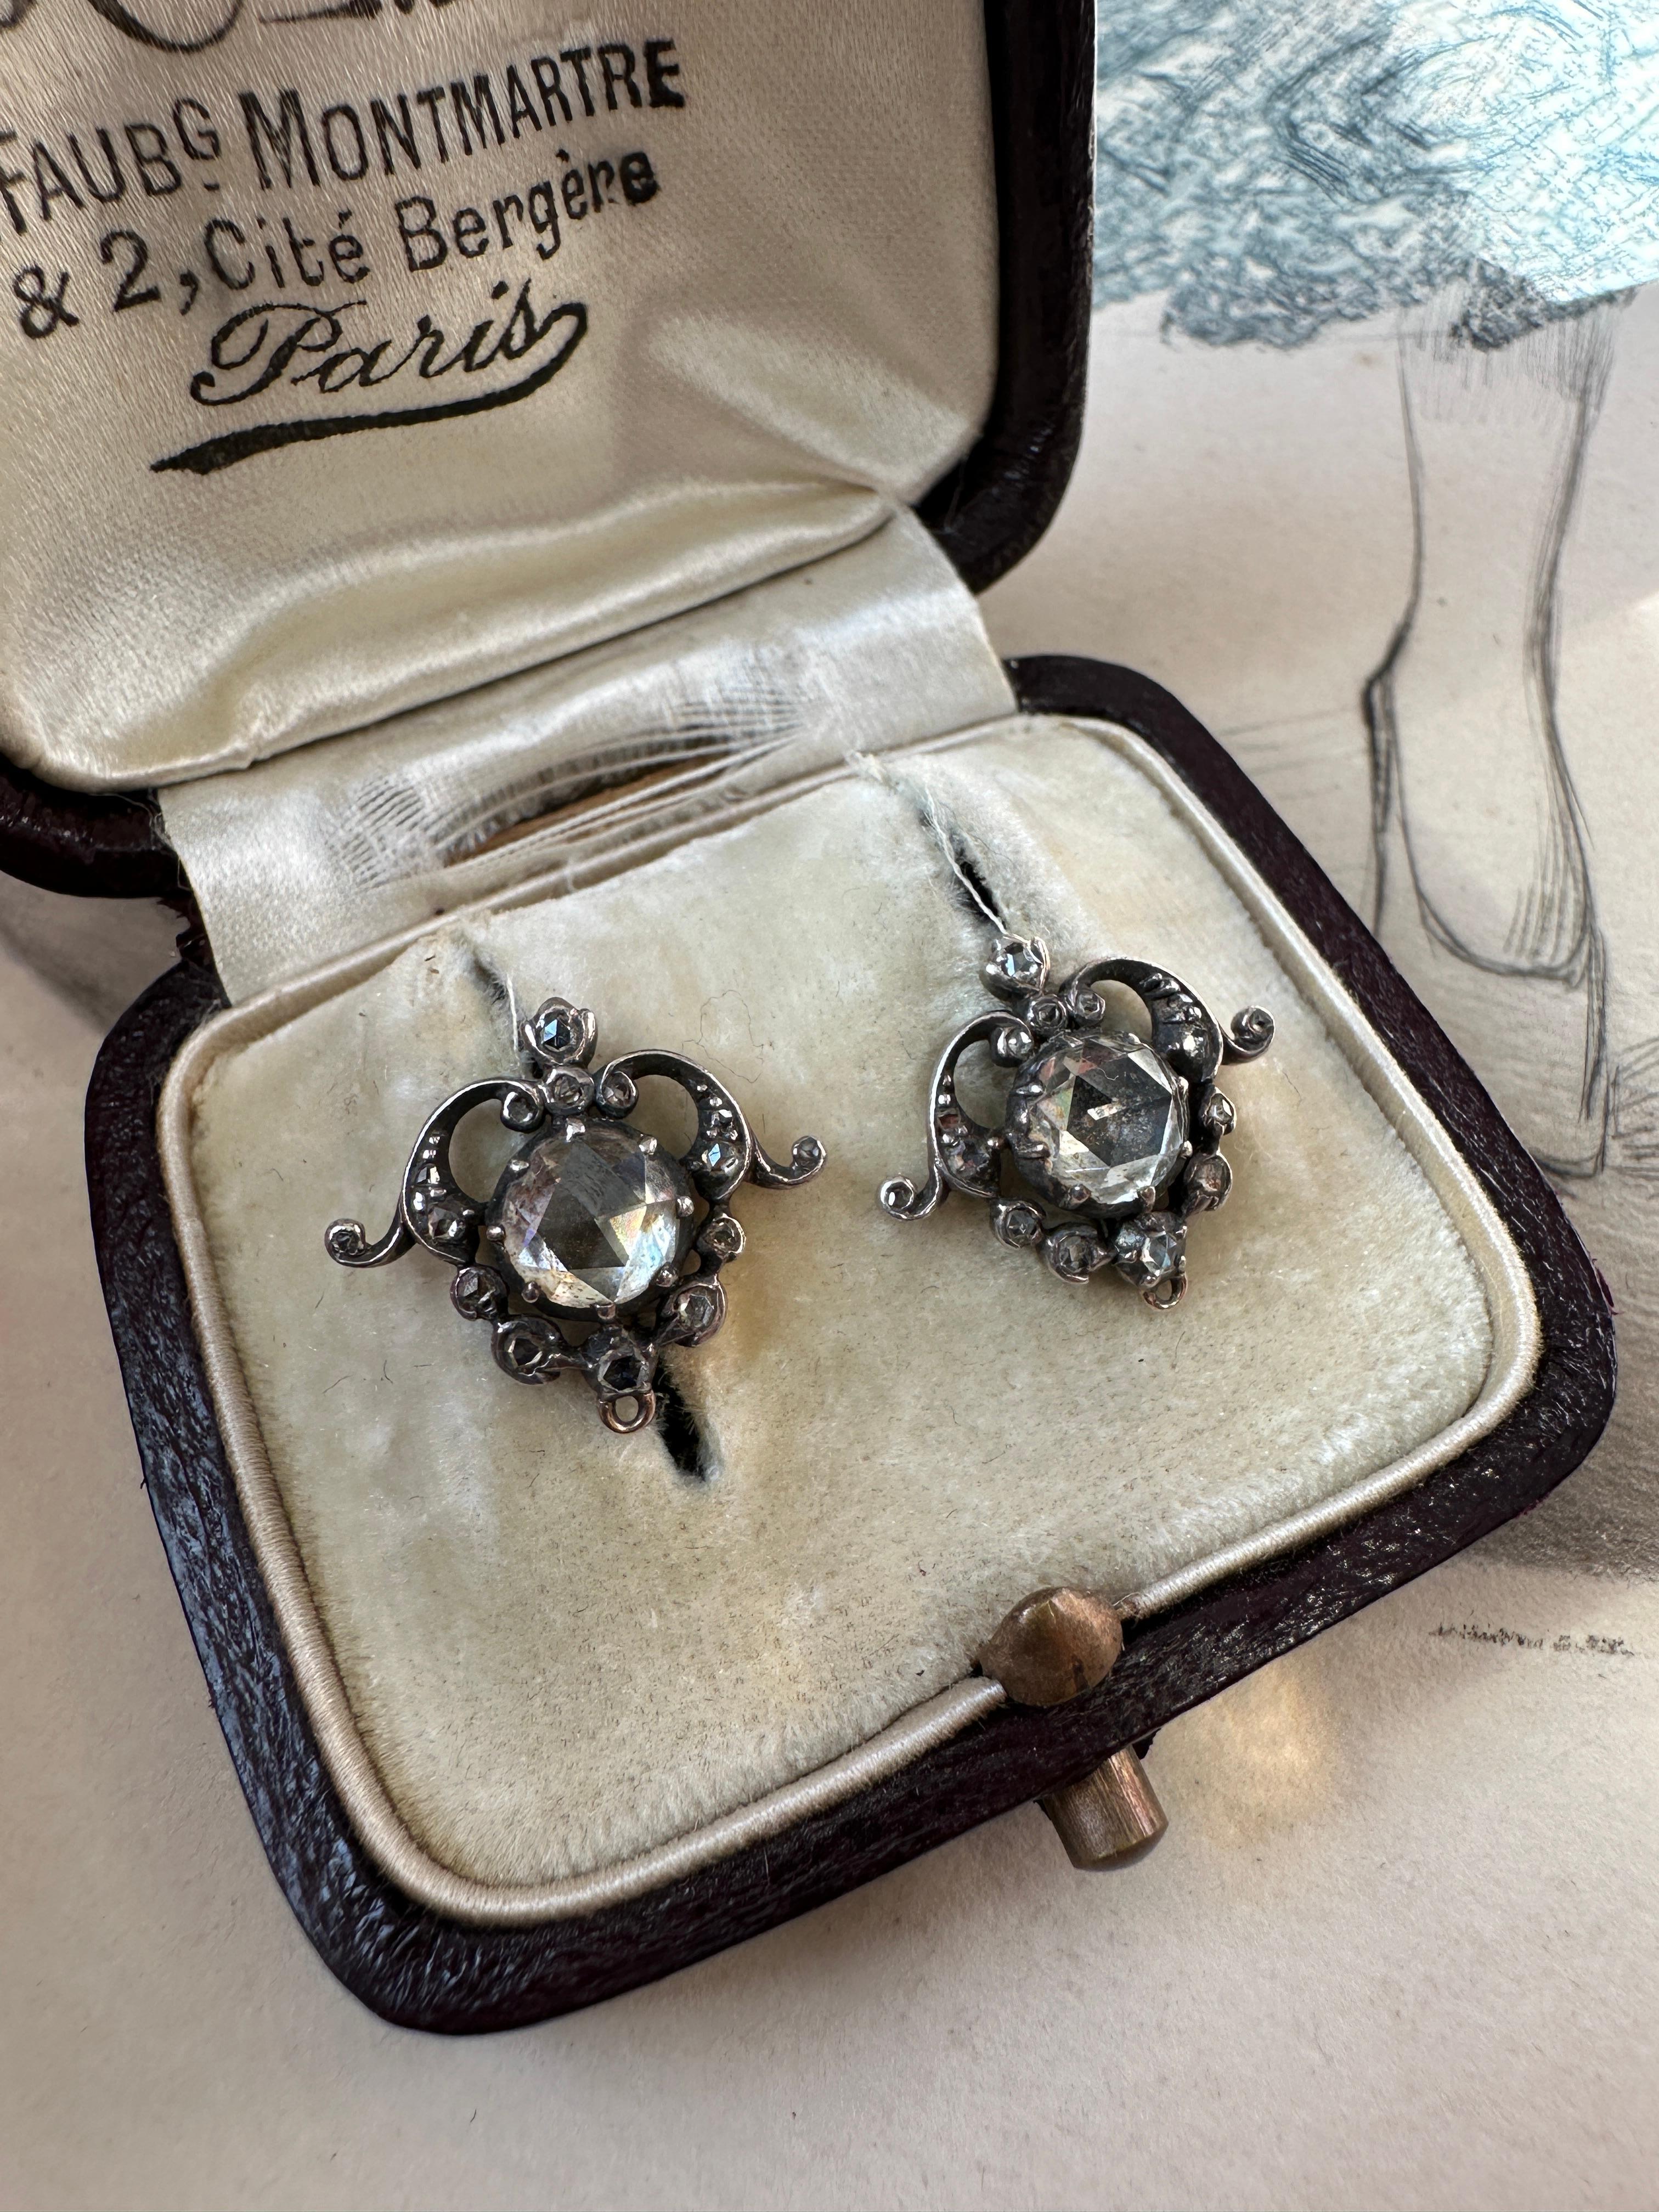 These romantic Victorian conversion earrings are symbolic of love’s burning passion. Centered on a .75 carat rose cut diamond, the heart shaped frame is adorned with tiny glittering rose cut diamonds and aflame with eternal love. The components have